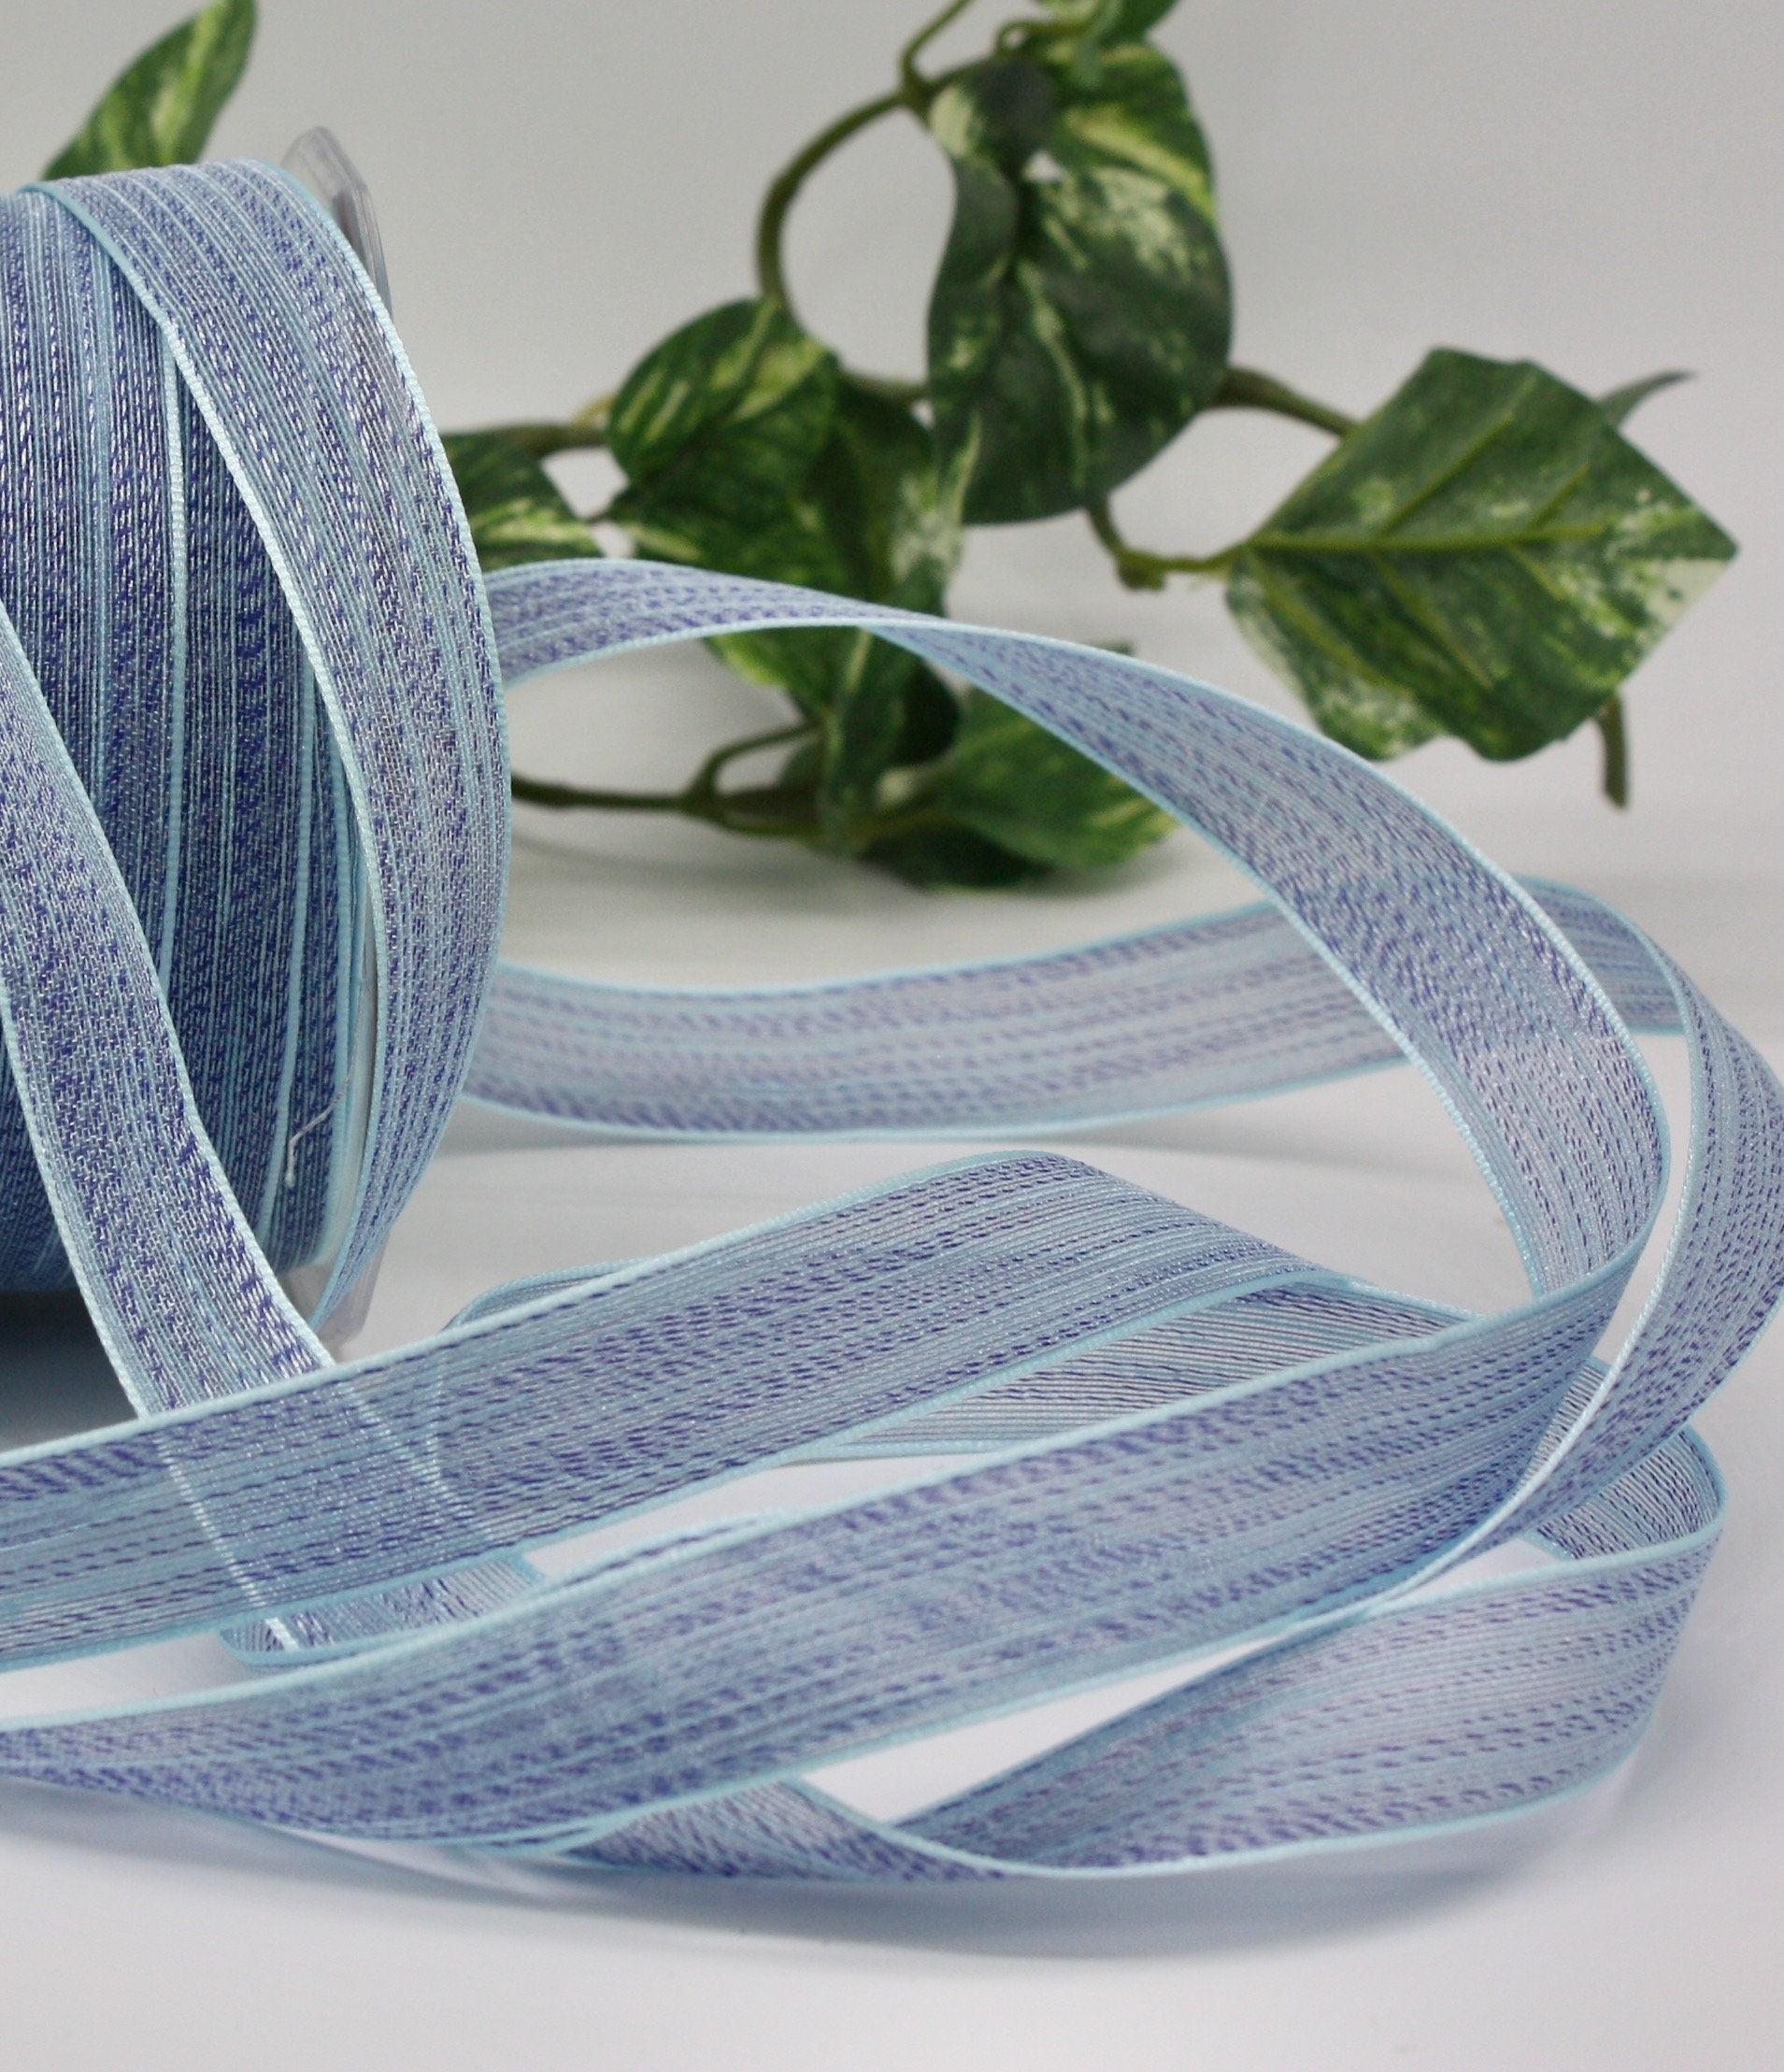 Blue Ribbon 1-1/2 inch x 25 Yards, Royal Blue Satin Fabric Silk Ribbon for Gift Wrapping, Hair Bows Making, Floral Bouquets, Wreaths, DIY Sewing